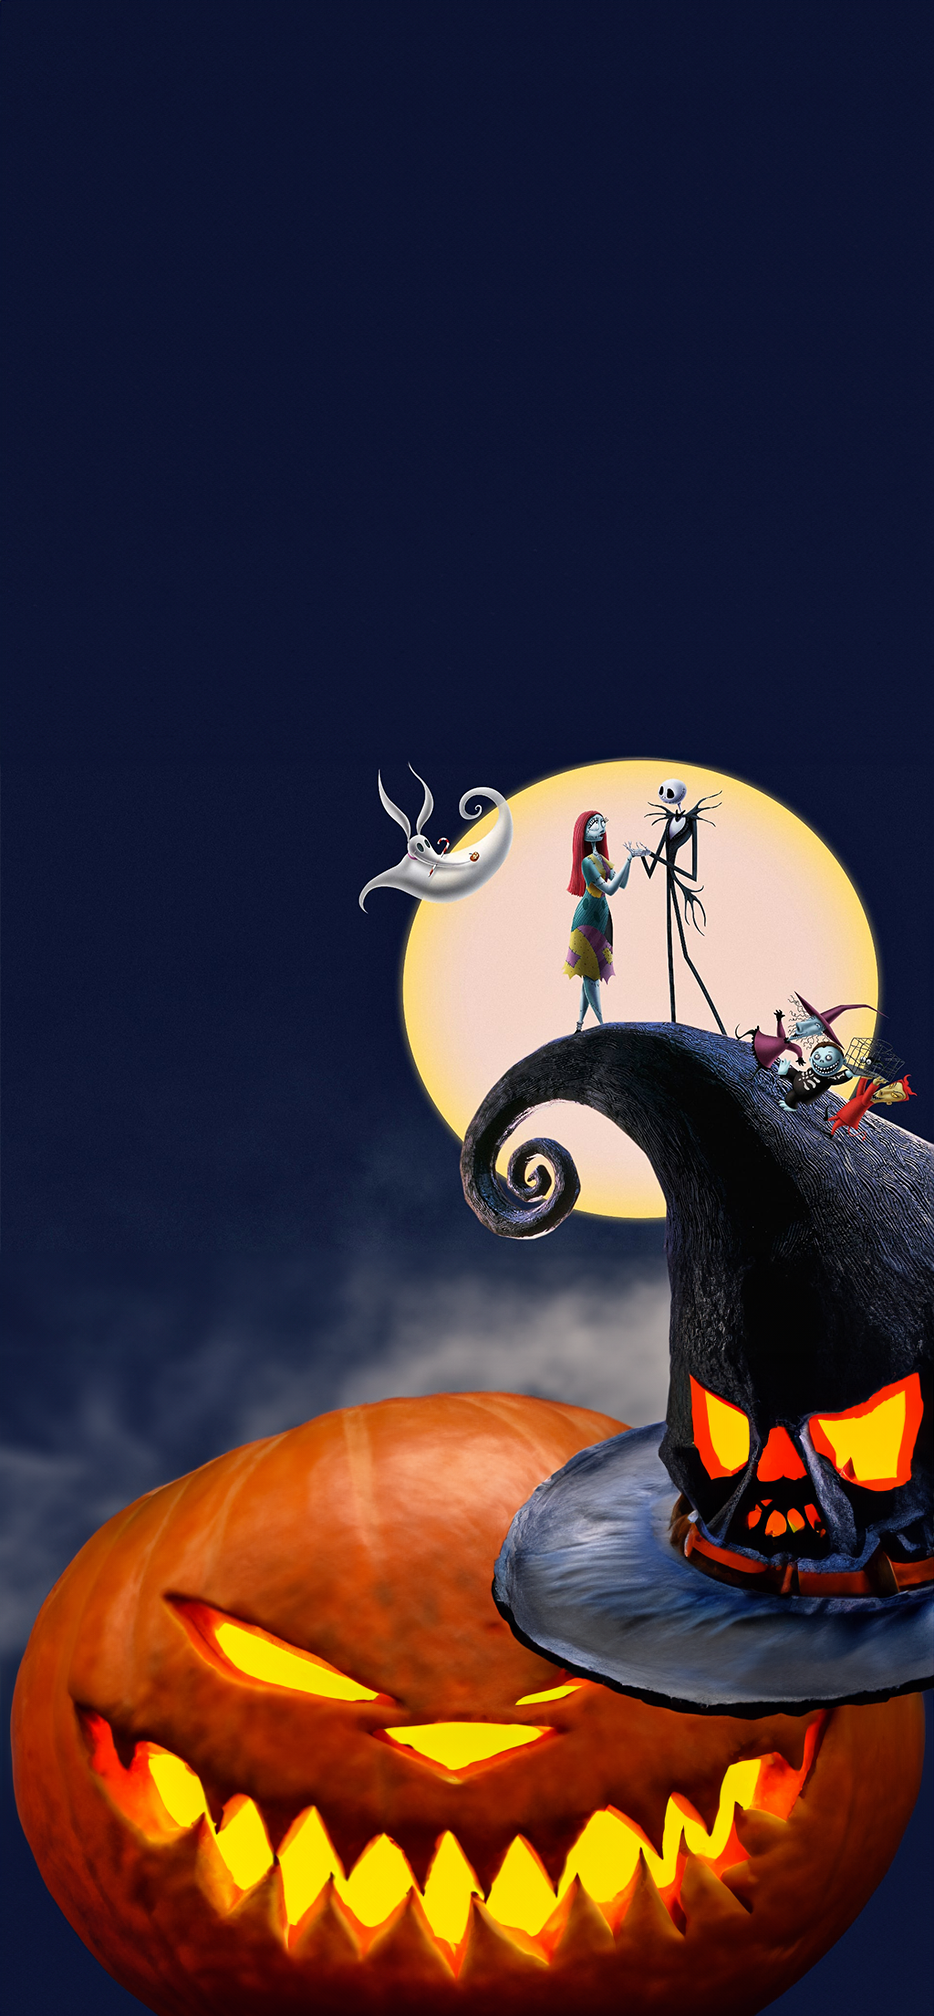 Moonlit Souls Jack and Sally under the full moon Front Door Cover Banner Wrap